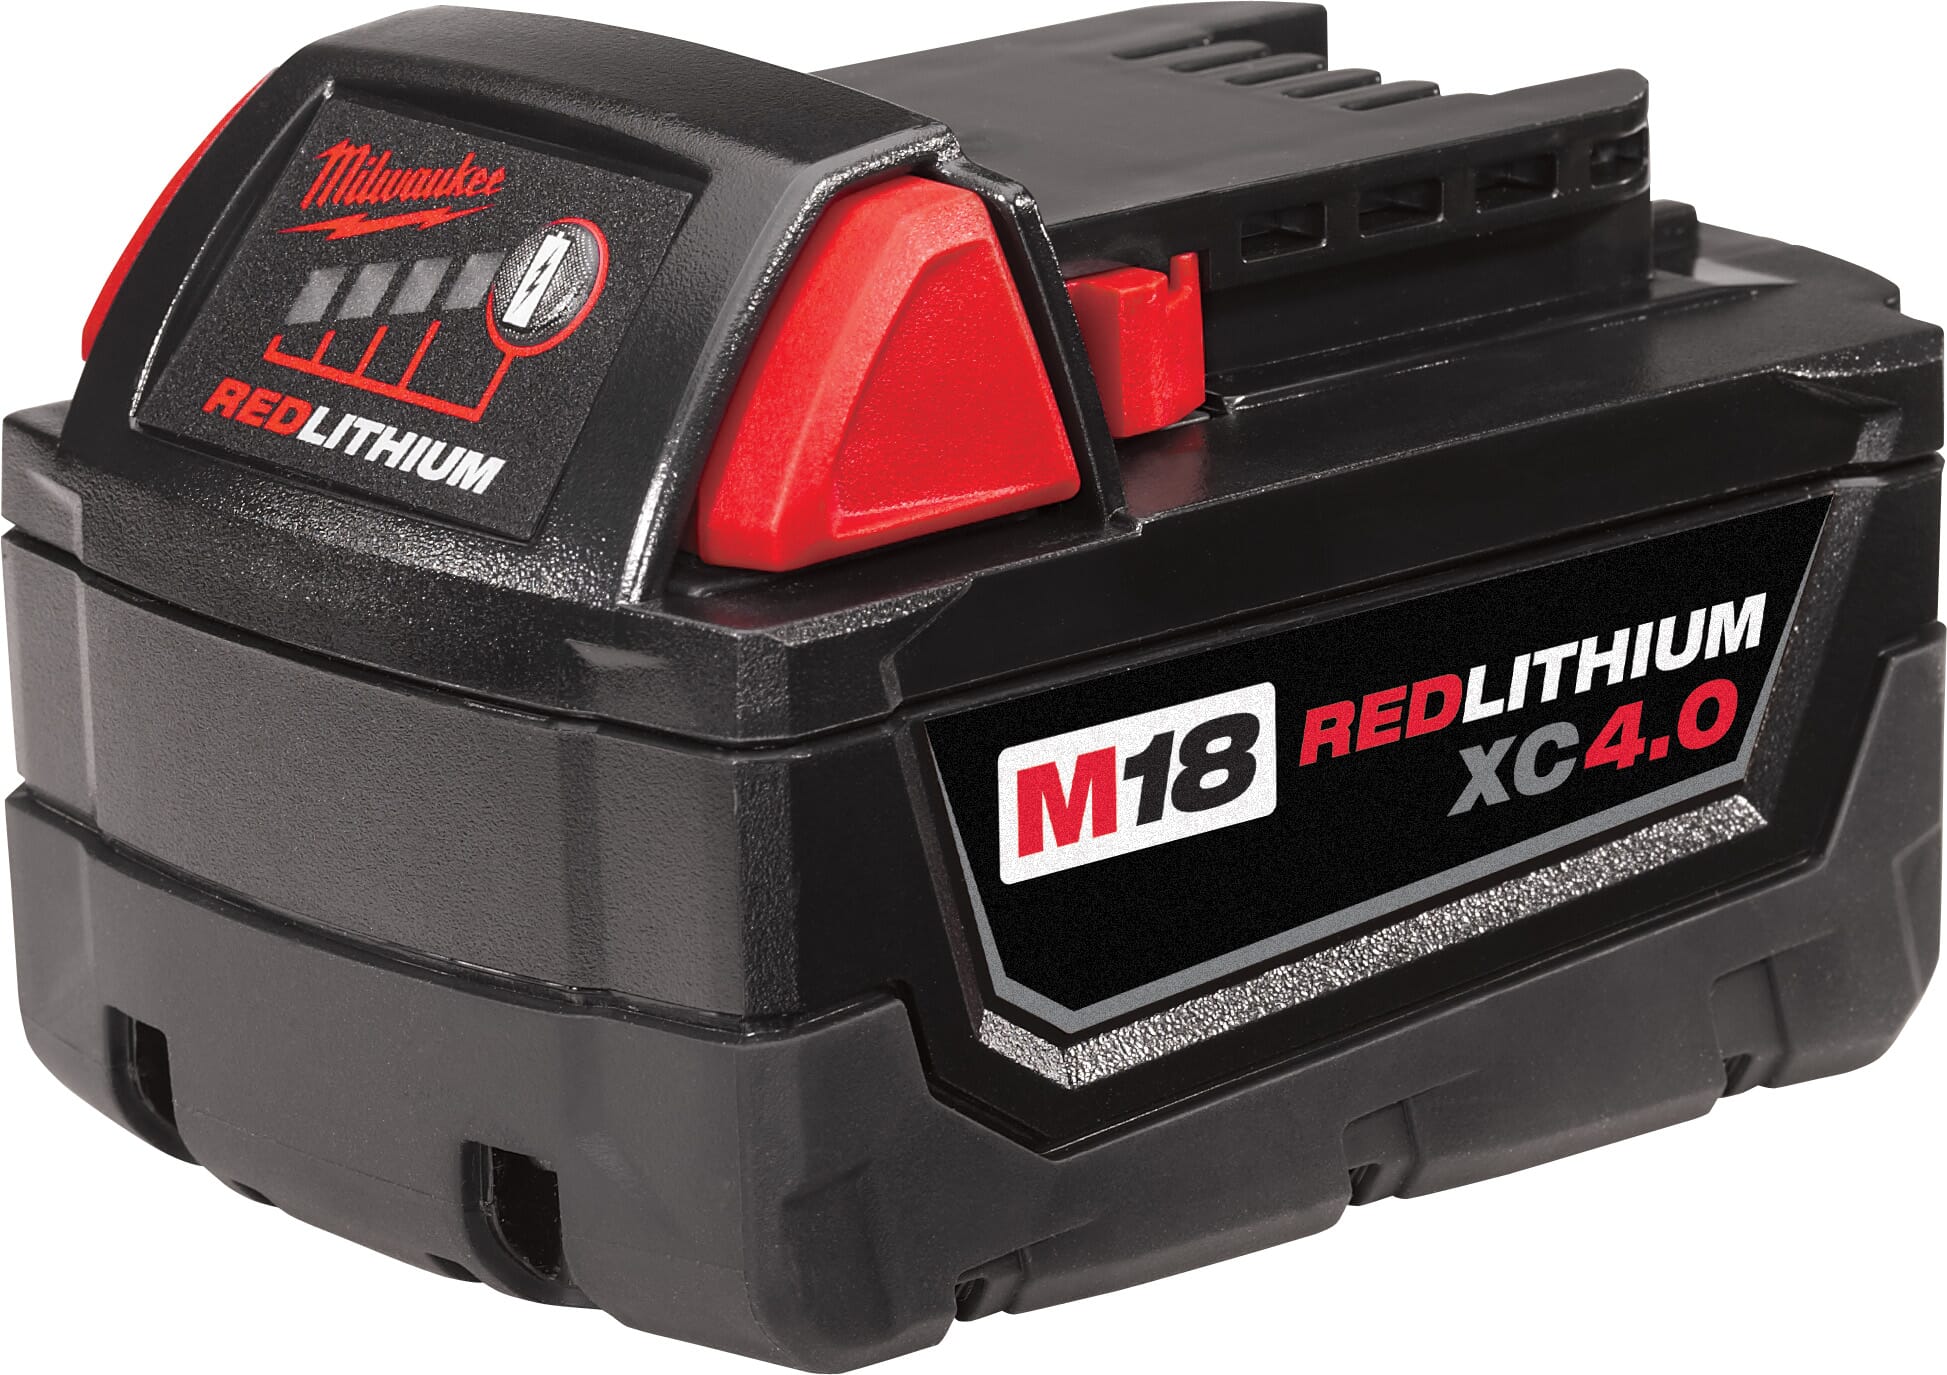 Milwaukee® M18™ REDLITHIUM™ 48-11-1840 Rechargeable Cordless Battery Pack, 4 Ah Lithium-Ion Battery, 18 VDC Charge, For Use With M18™ Cordless Power Tool